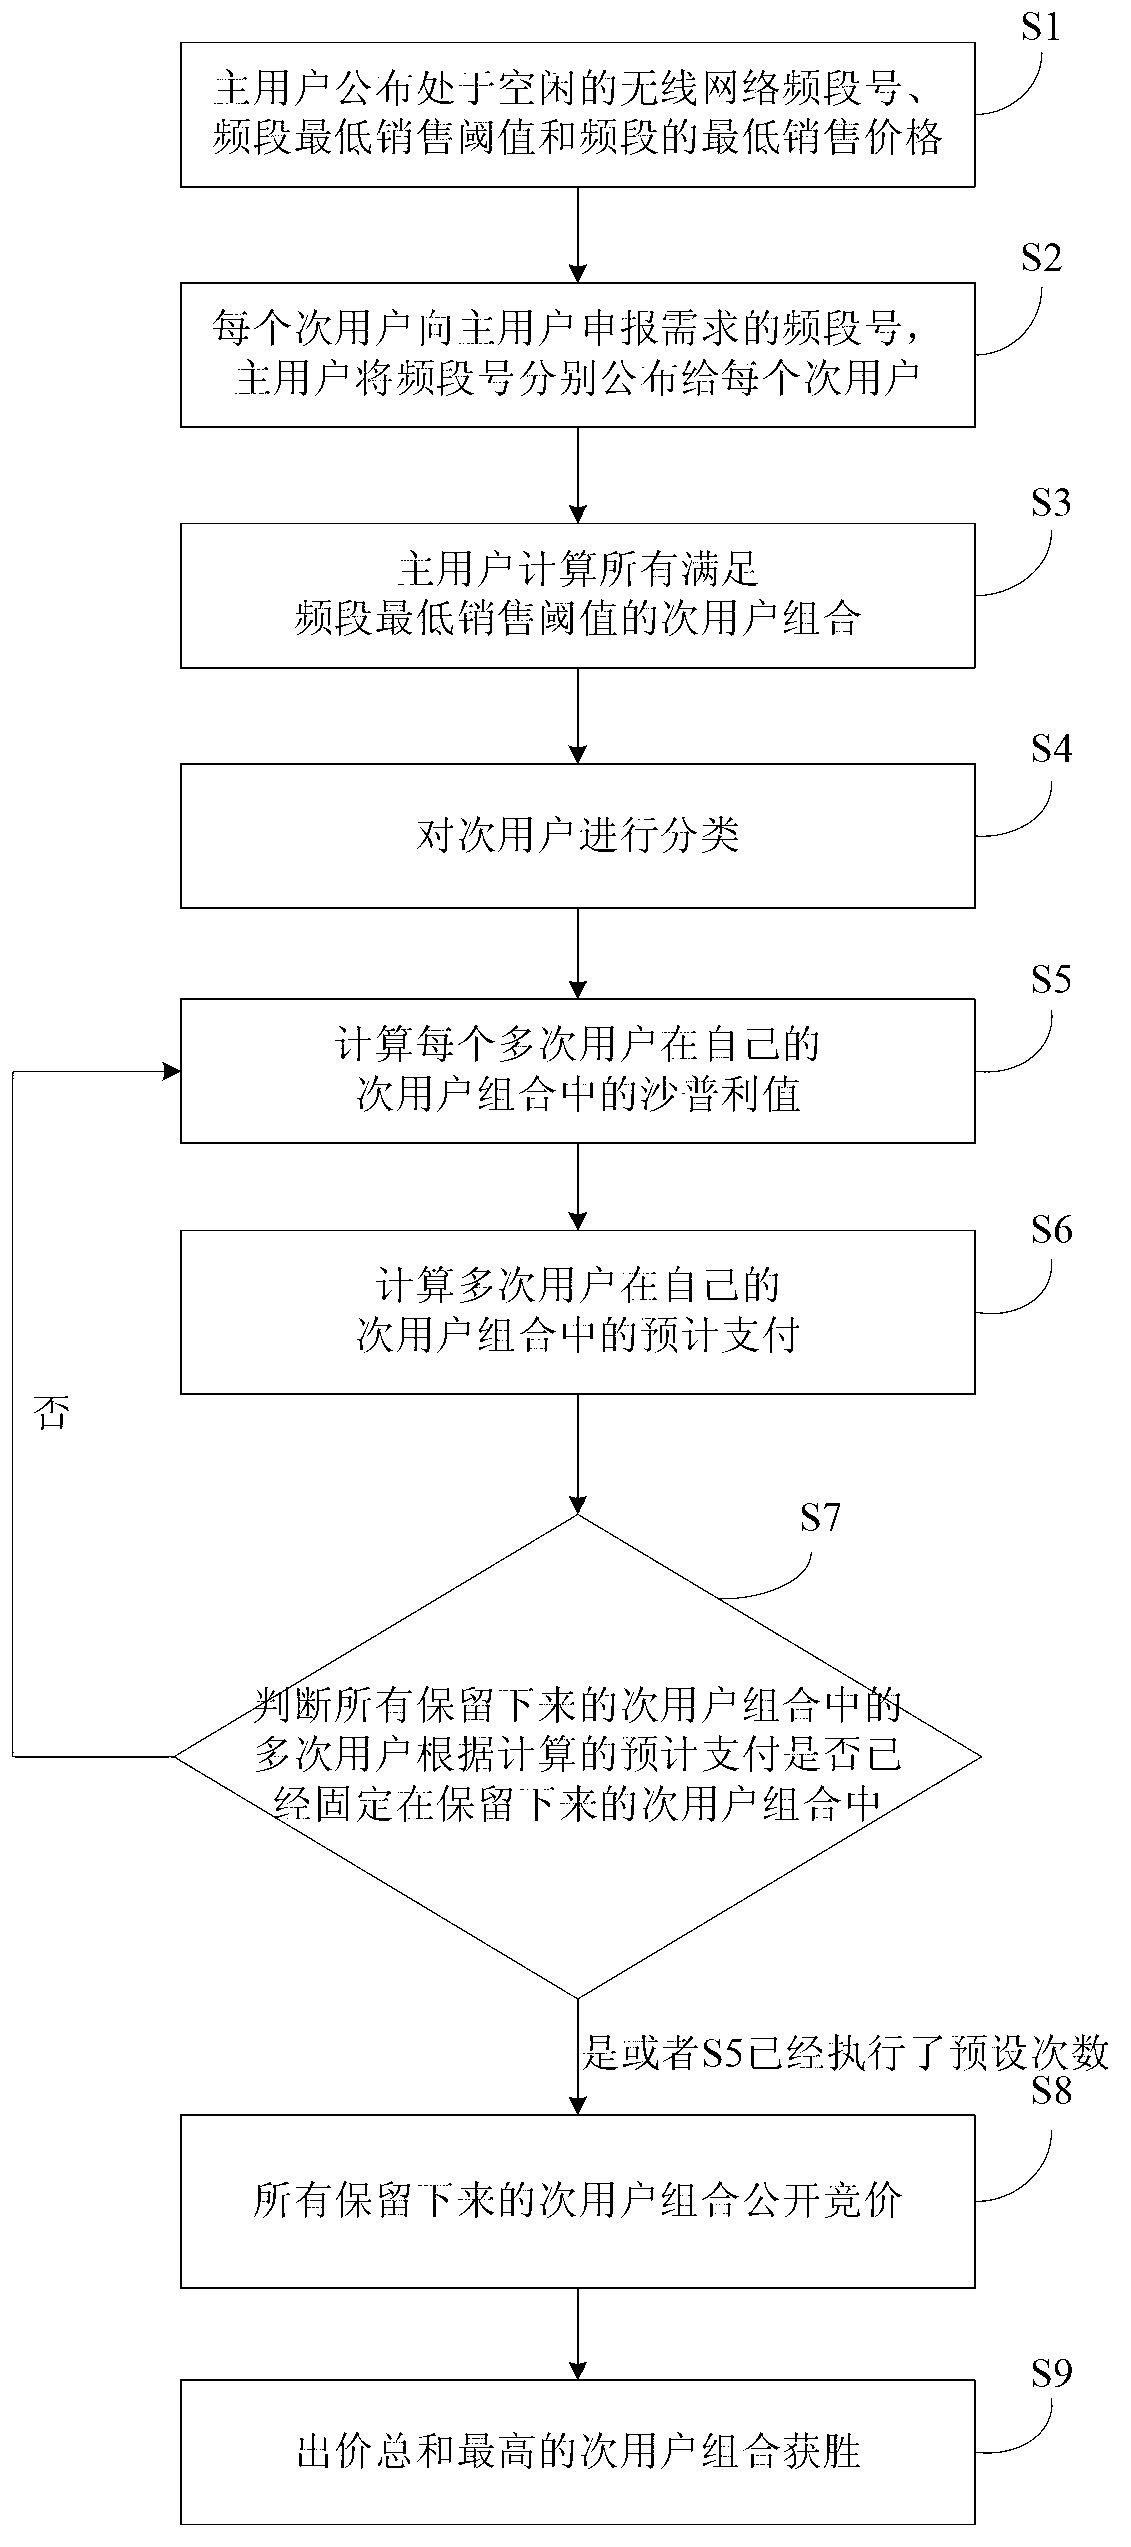 Shapley-algorithm-based method for distributing frequency bands of wireless network